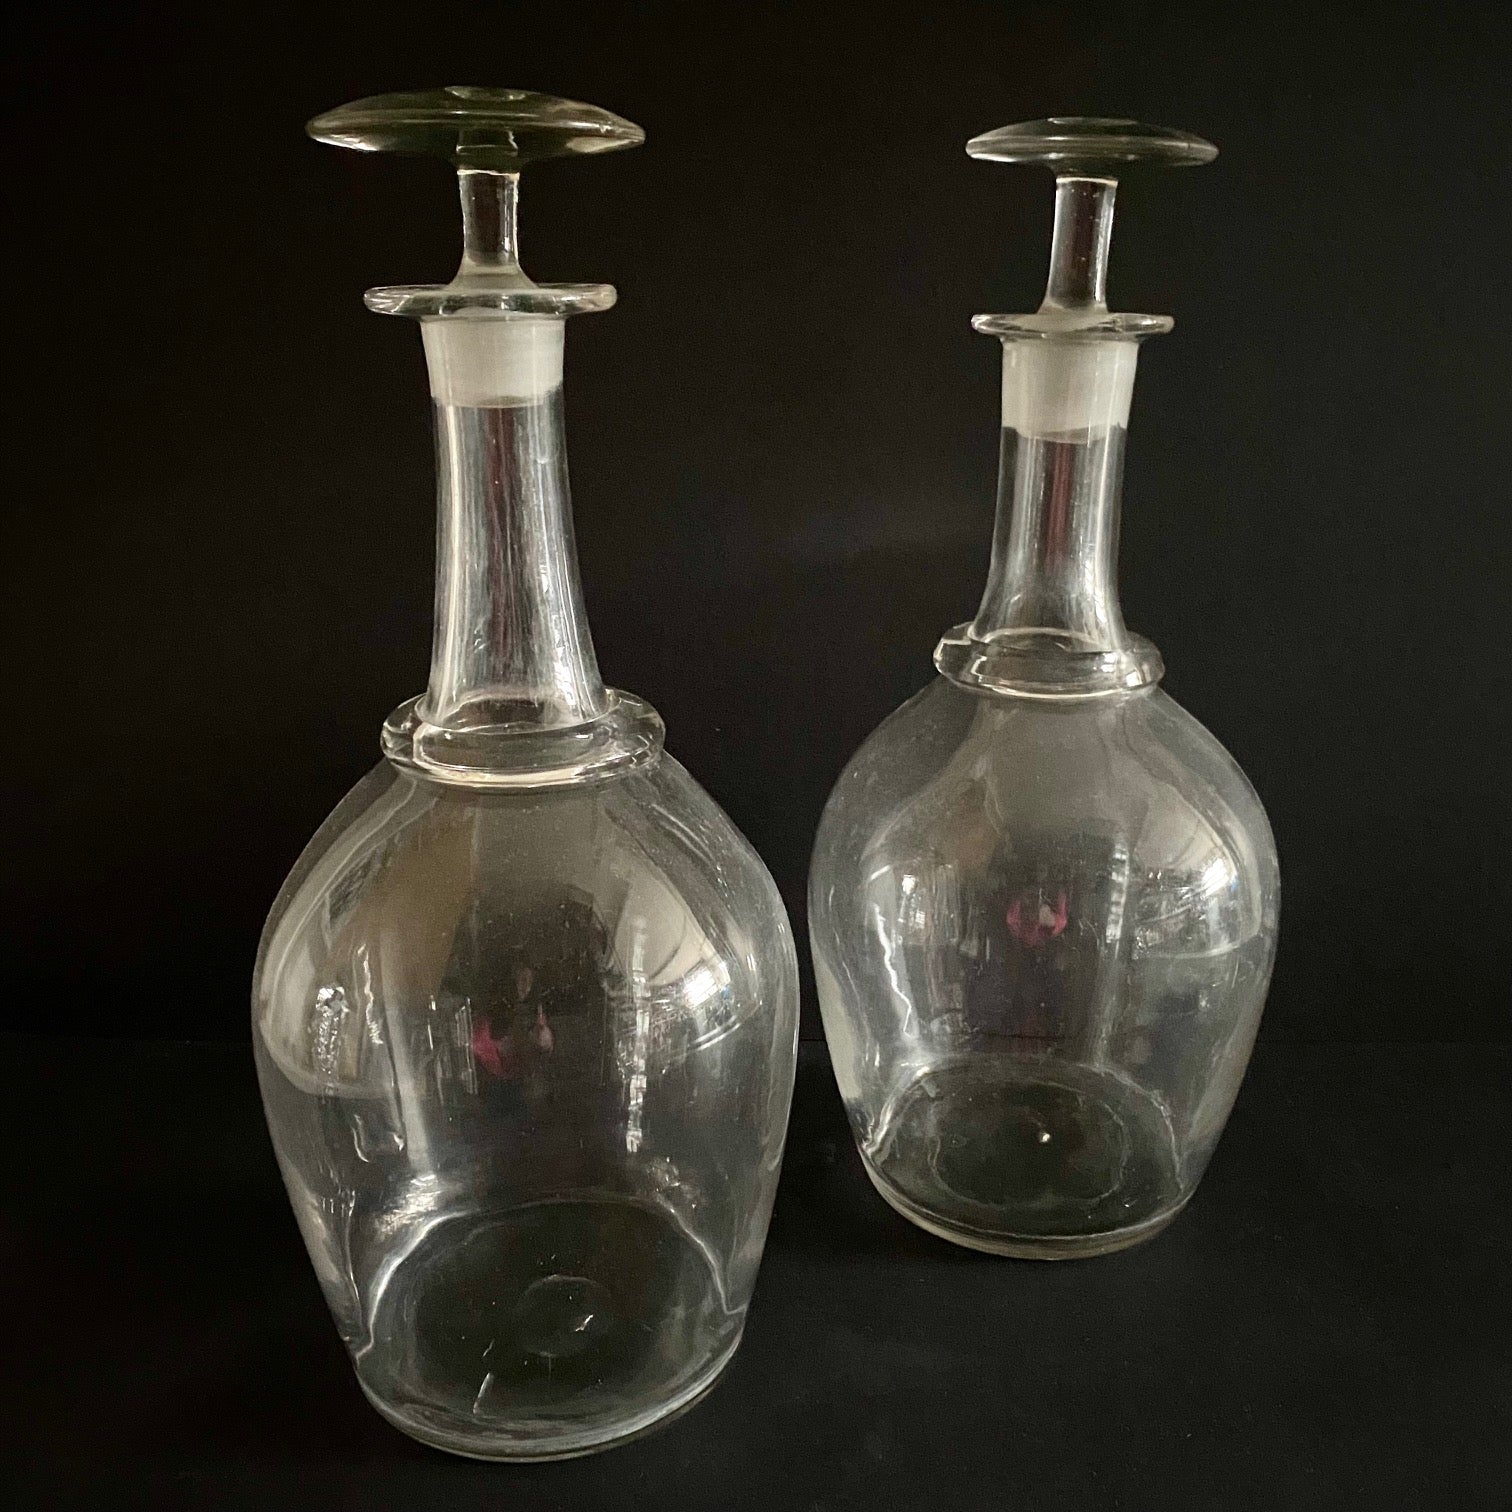 PAIR HUGE ANTIQUE FRENCH GLASS DECANTERS